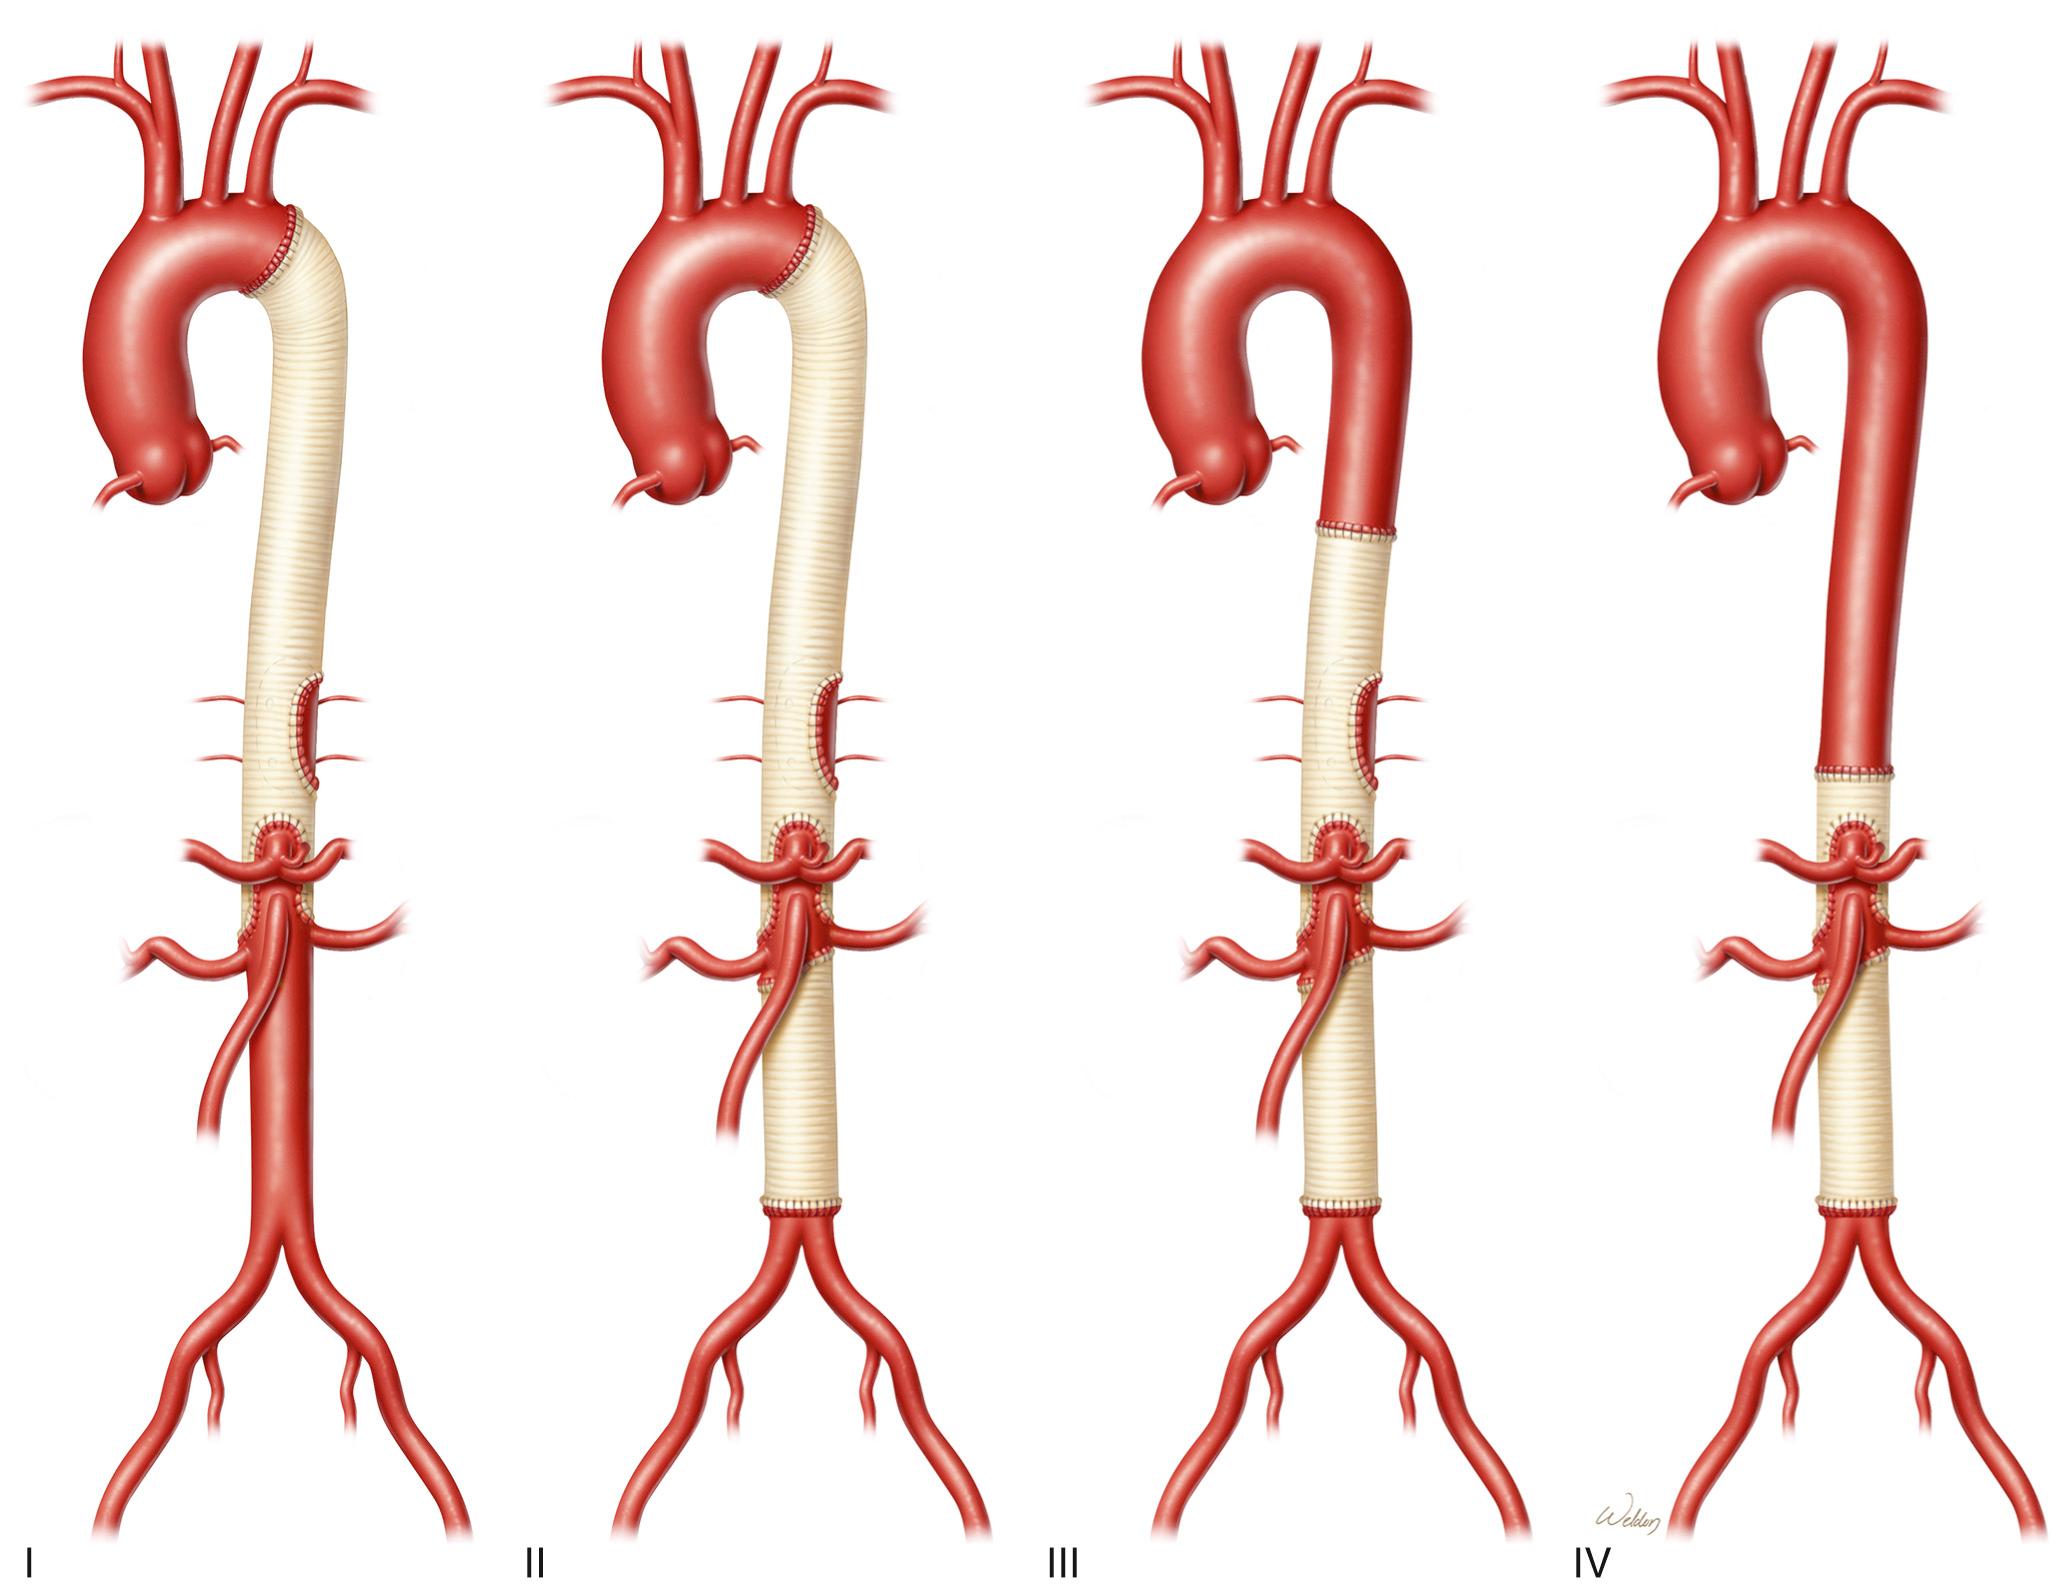 FIGURE 69-1, The Crawford classification system for describing the extent of thoracoabdominal aortic aneurysm repair.